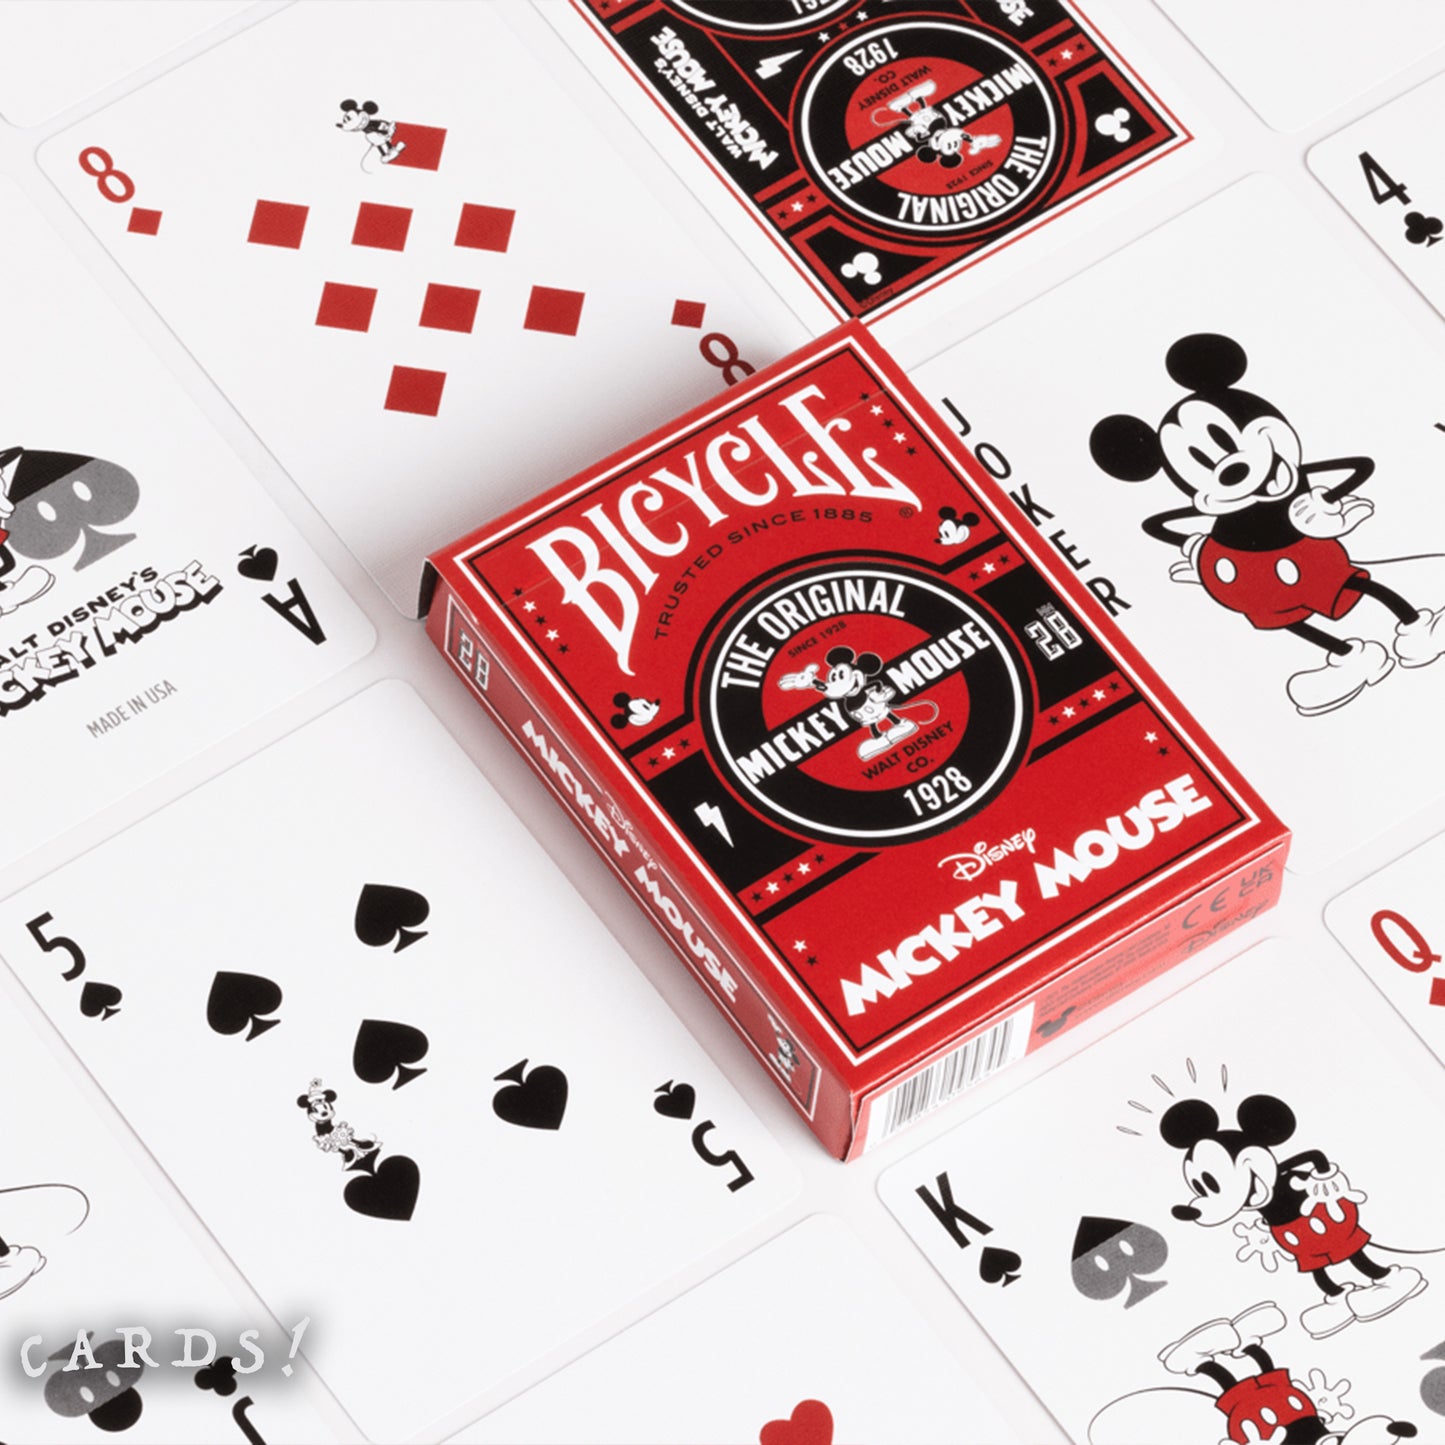 Bicycle® Disney Classic Mickey Mouse Playing Cards